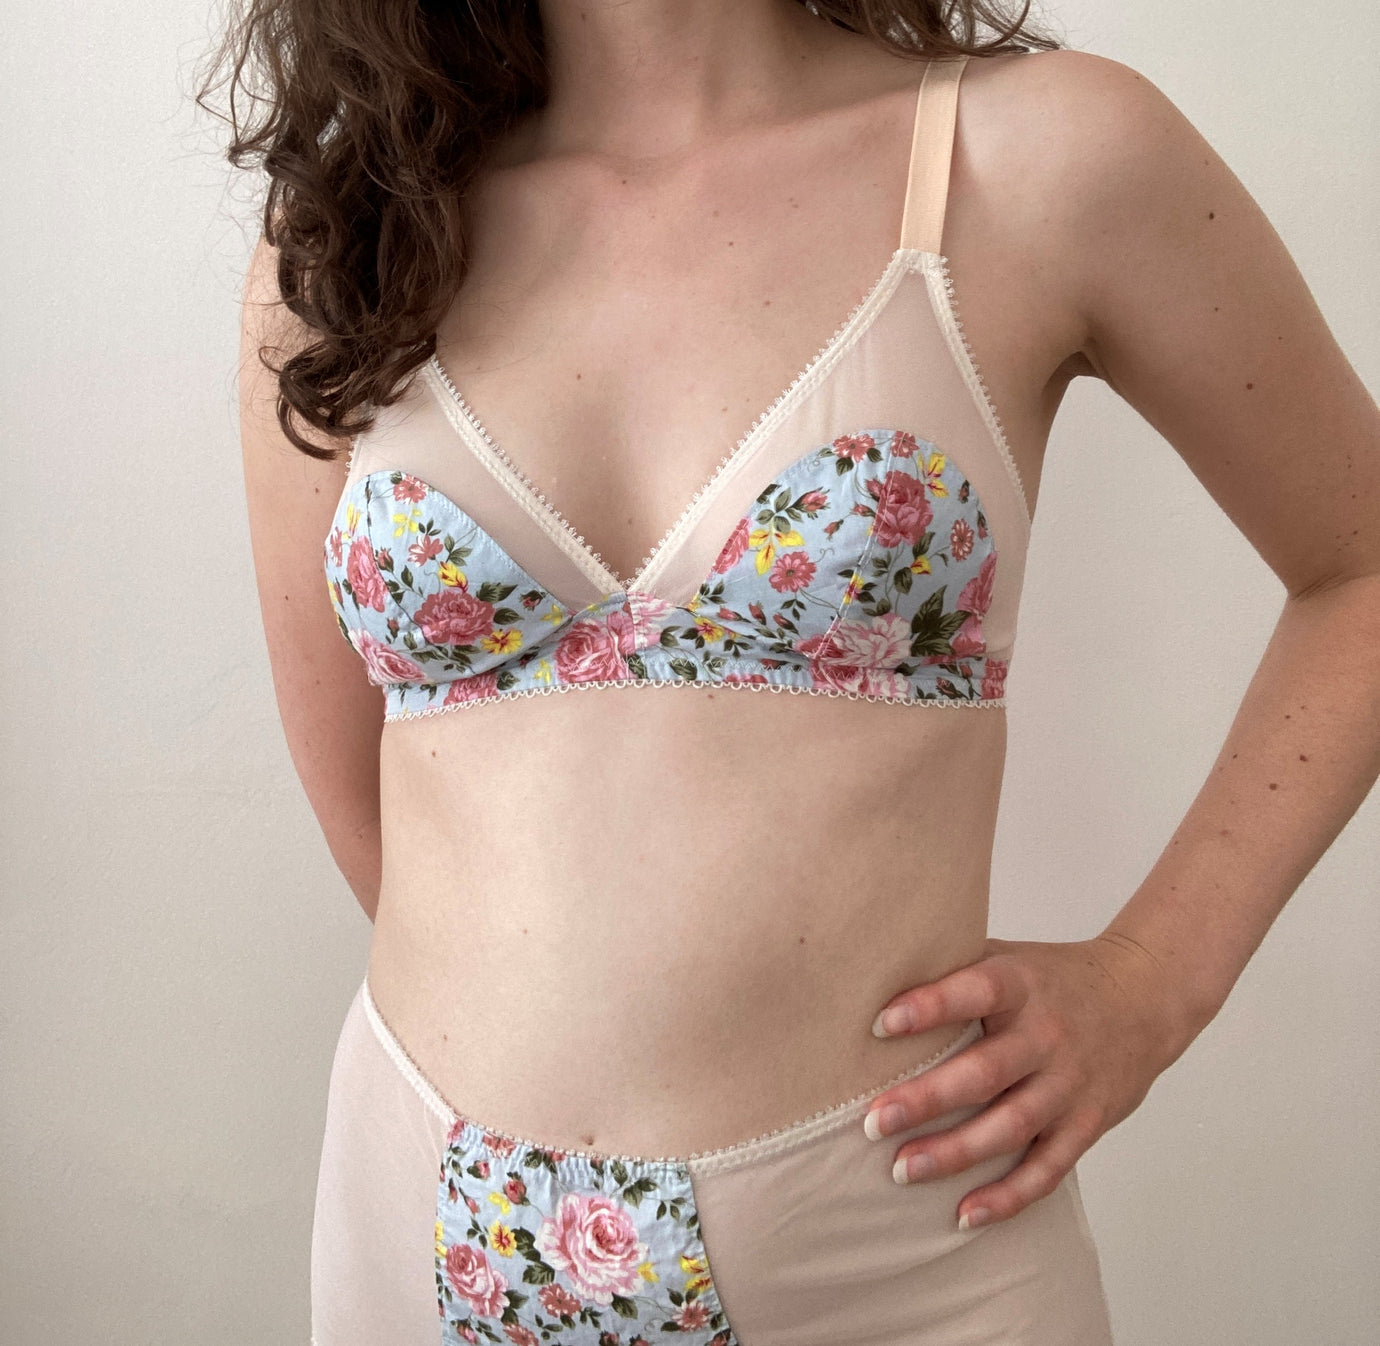 Woman wearing the Willow Soft Cup Bra sewing pattern from Sew Projects on The Fold Line. A bra pattern made in cotton, lace, tulle, satin or duoplex fabrics, featuring a high rigid cup, stretch neckline, adjustable shoulder straps, and a 2 hook and loop b